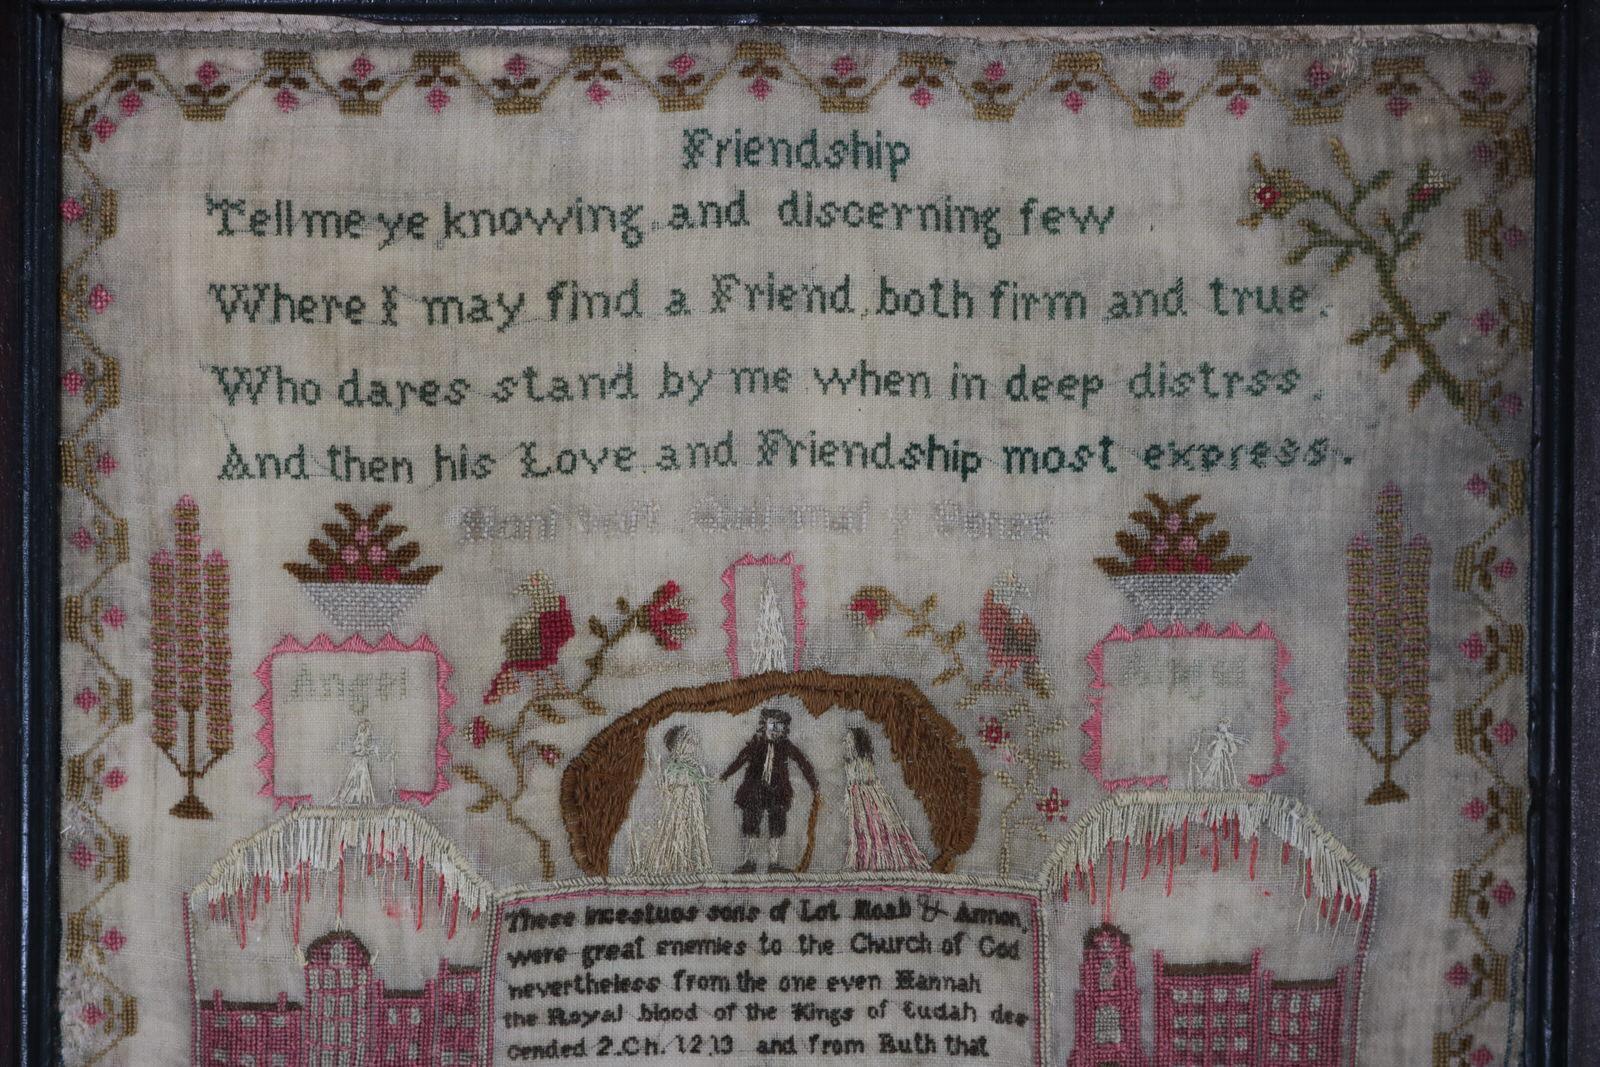 1830 Sampler by Eliza Jones with Friendship verse. The sampler is worked in wool and silk on linen ground, in a variety of stitches. Meandering strawberry border. Colours red, light brown, pink, blue and green. Verse entitled 'Friendship' reads,